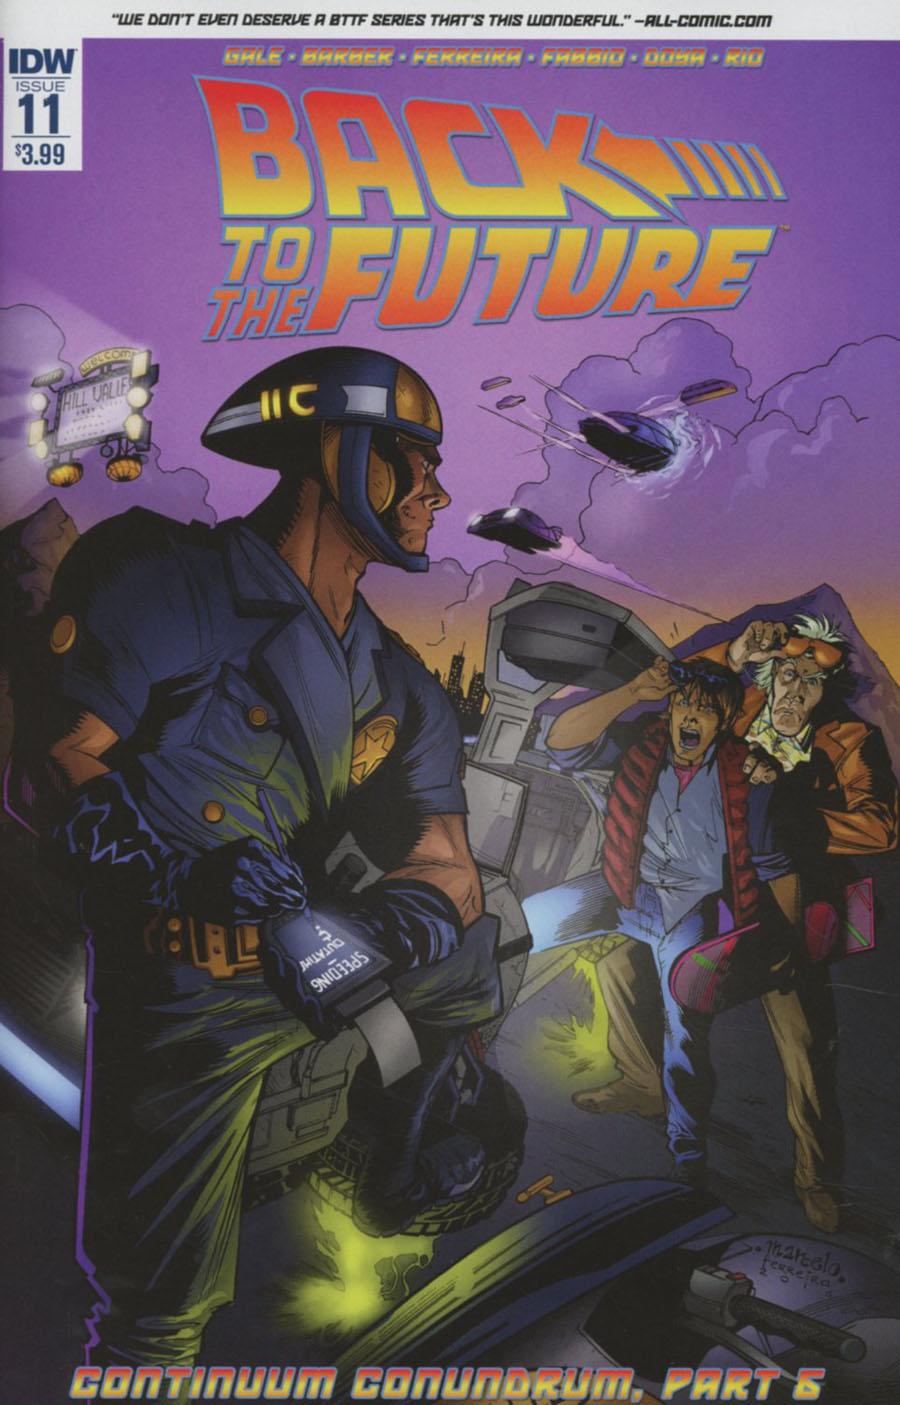 Back To The Future Vol. 2 #11